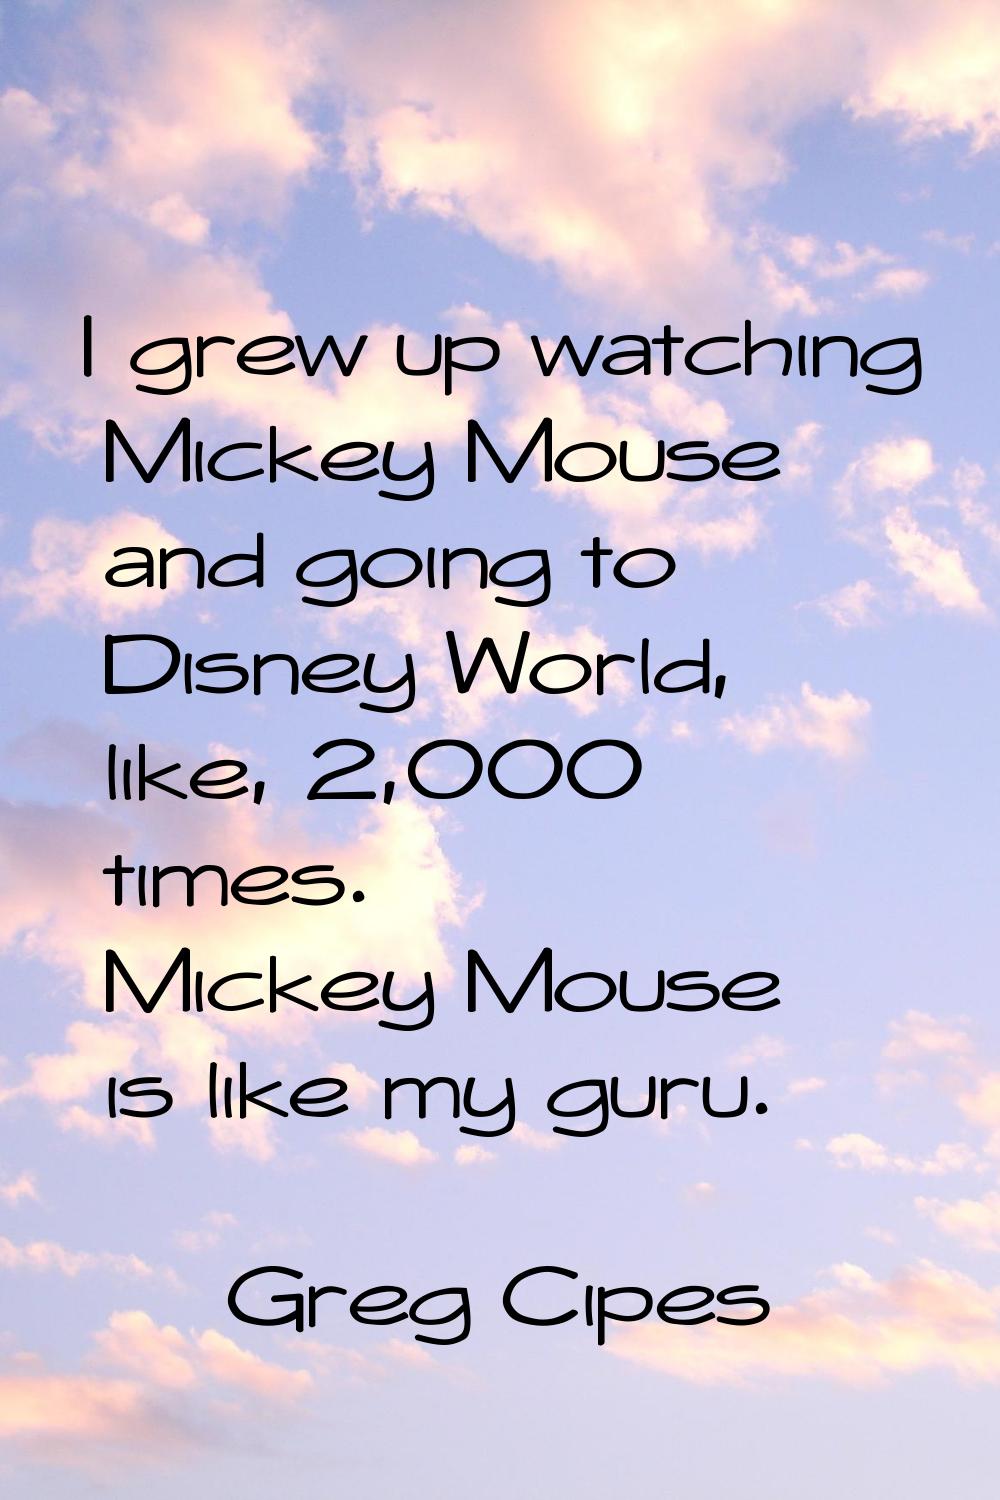 I grew up watching Mickey Mouse and going to Disney World, like, 2,000 times. Mickey Mouse is like 